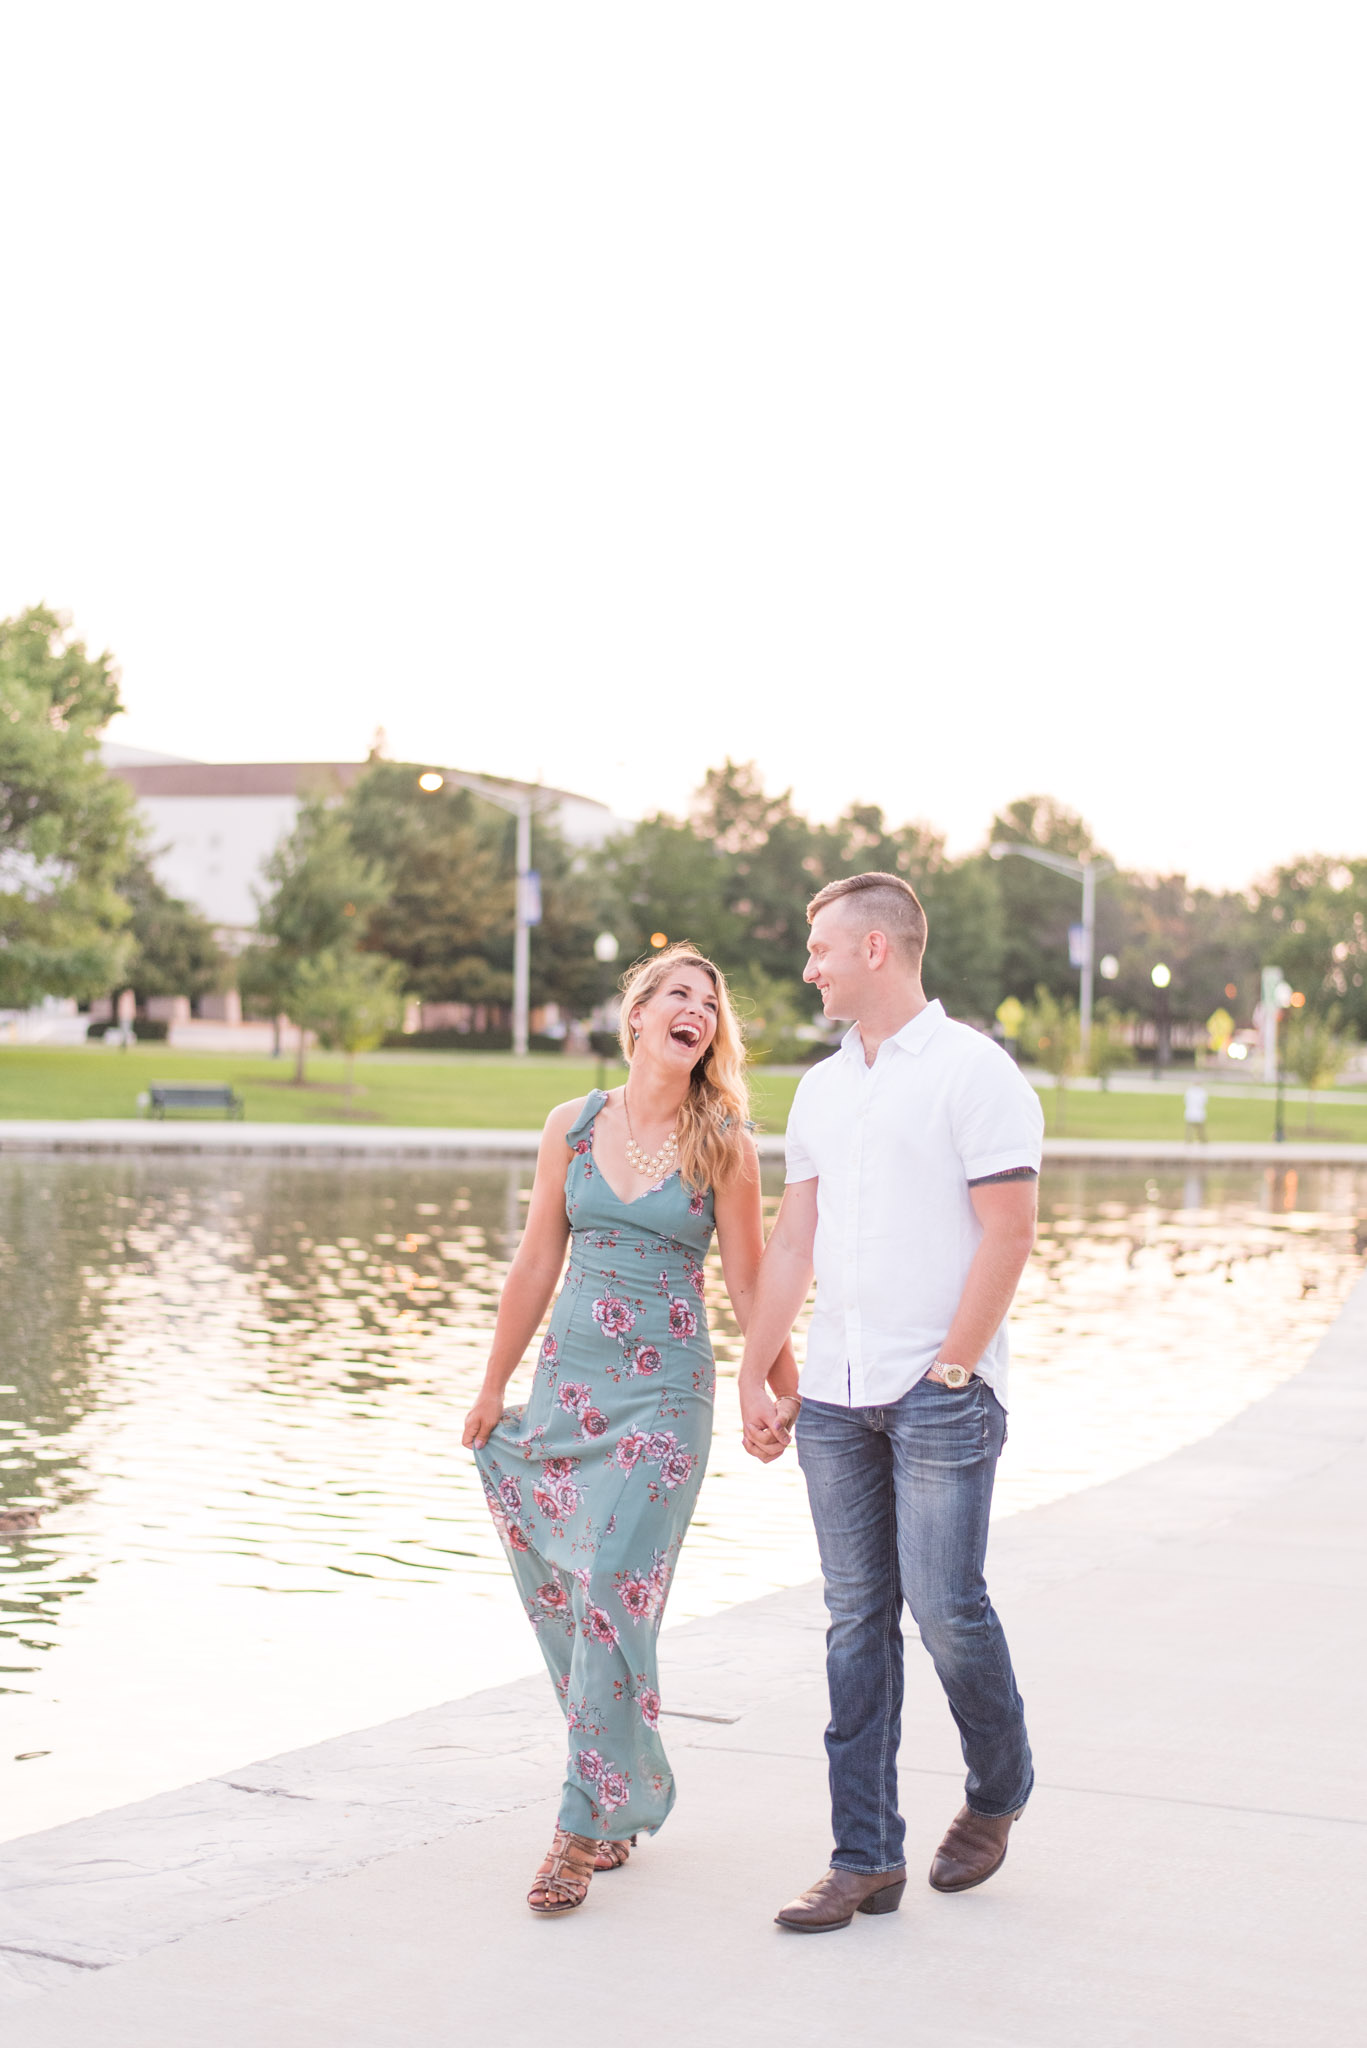 Engaged couple walks by lake and laughs.